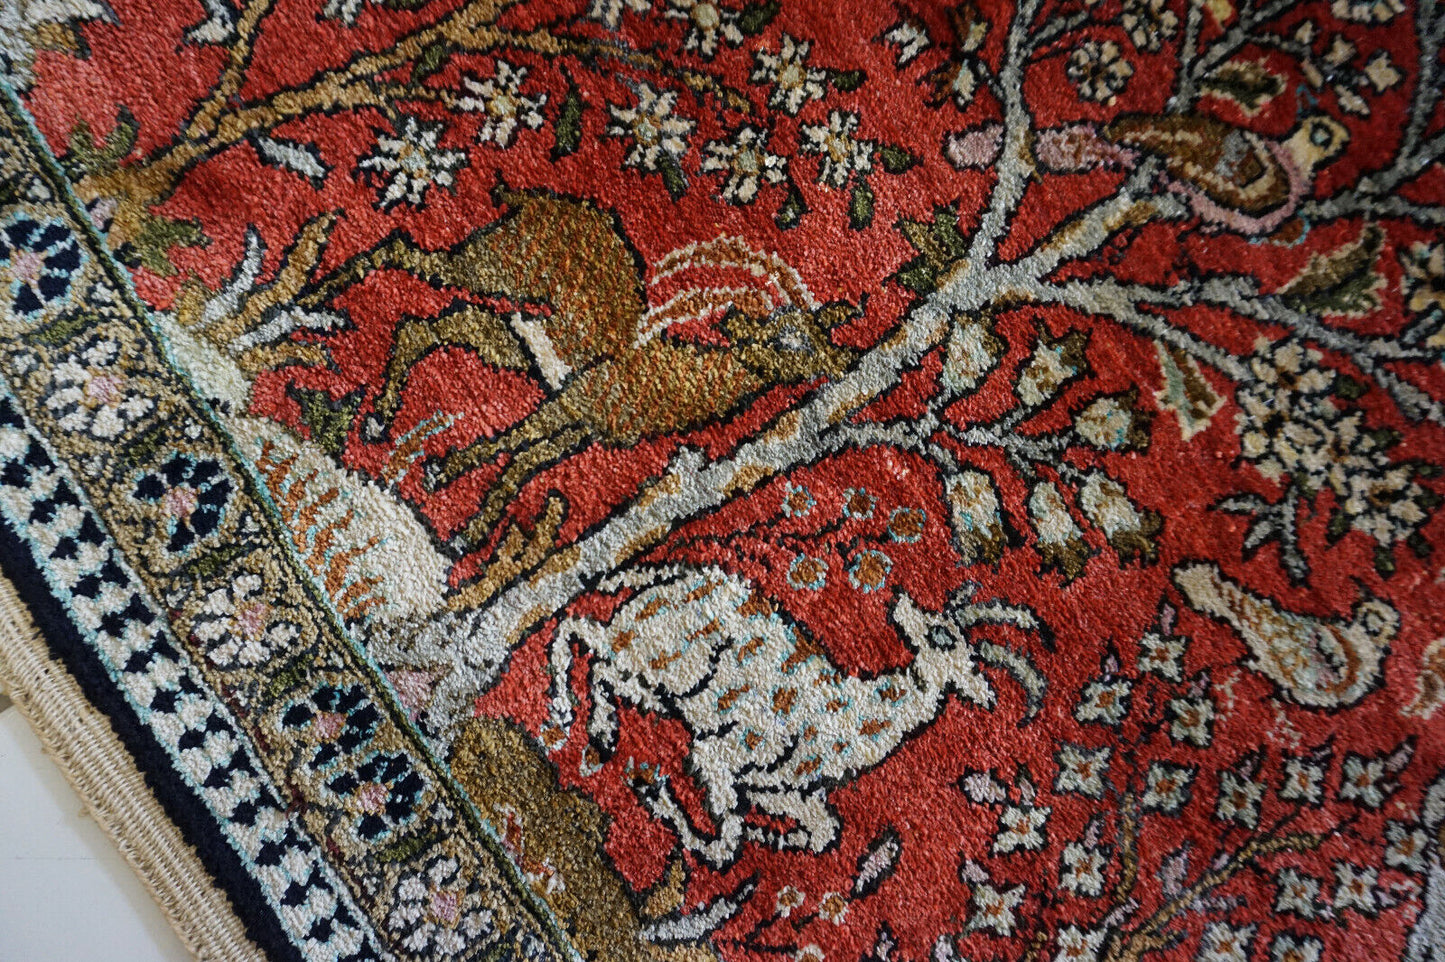 Detailed shot of the luminous sheen and vibrant colors of the Persian Qum silk rug